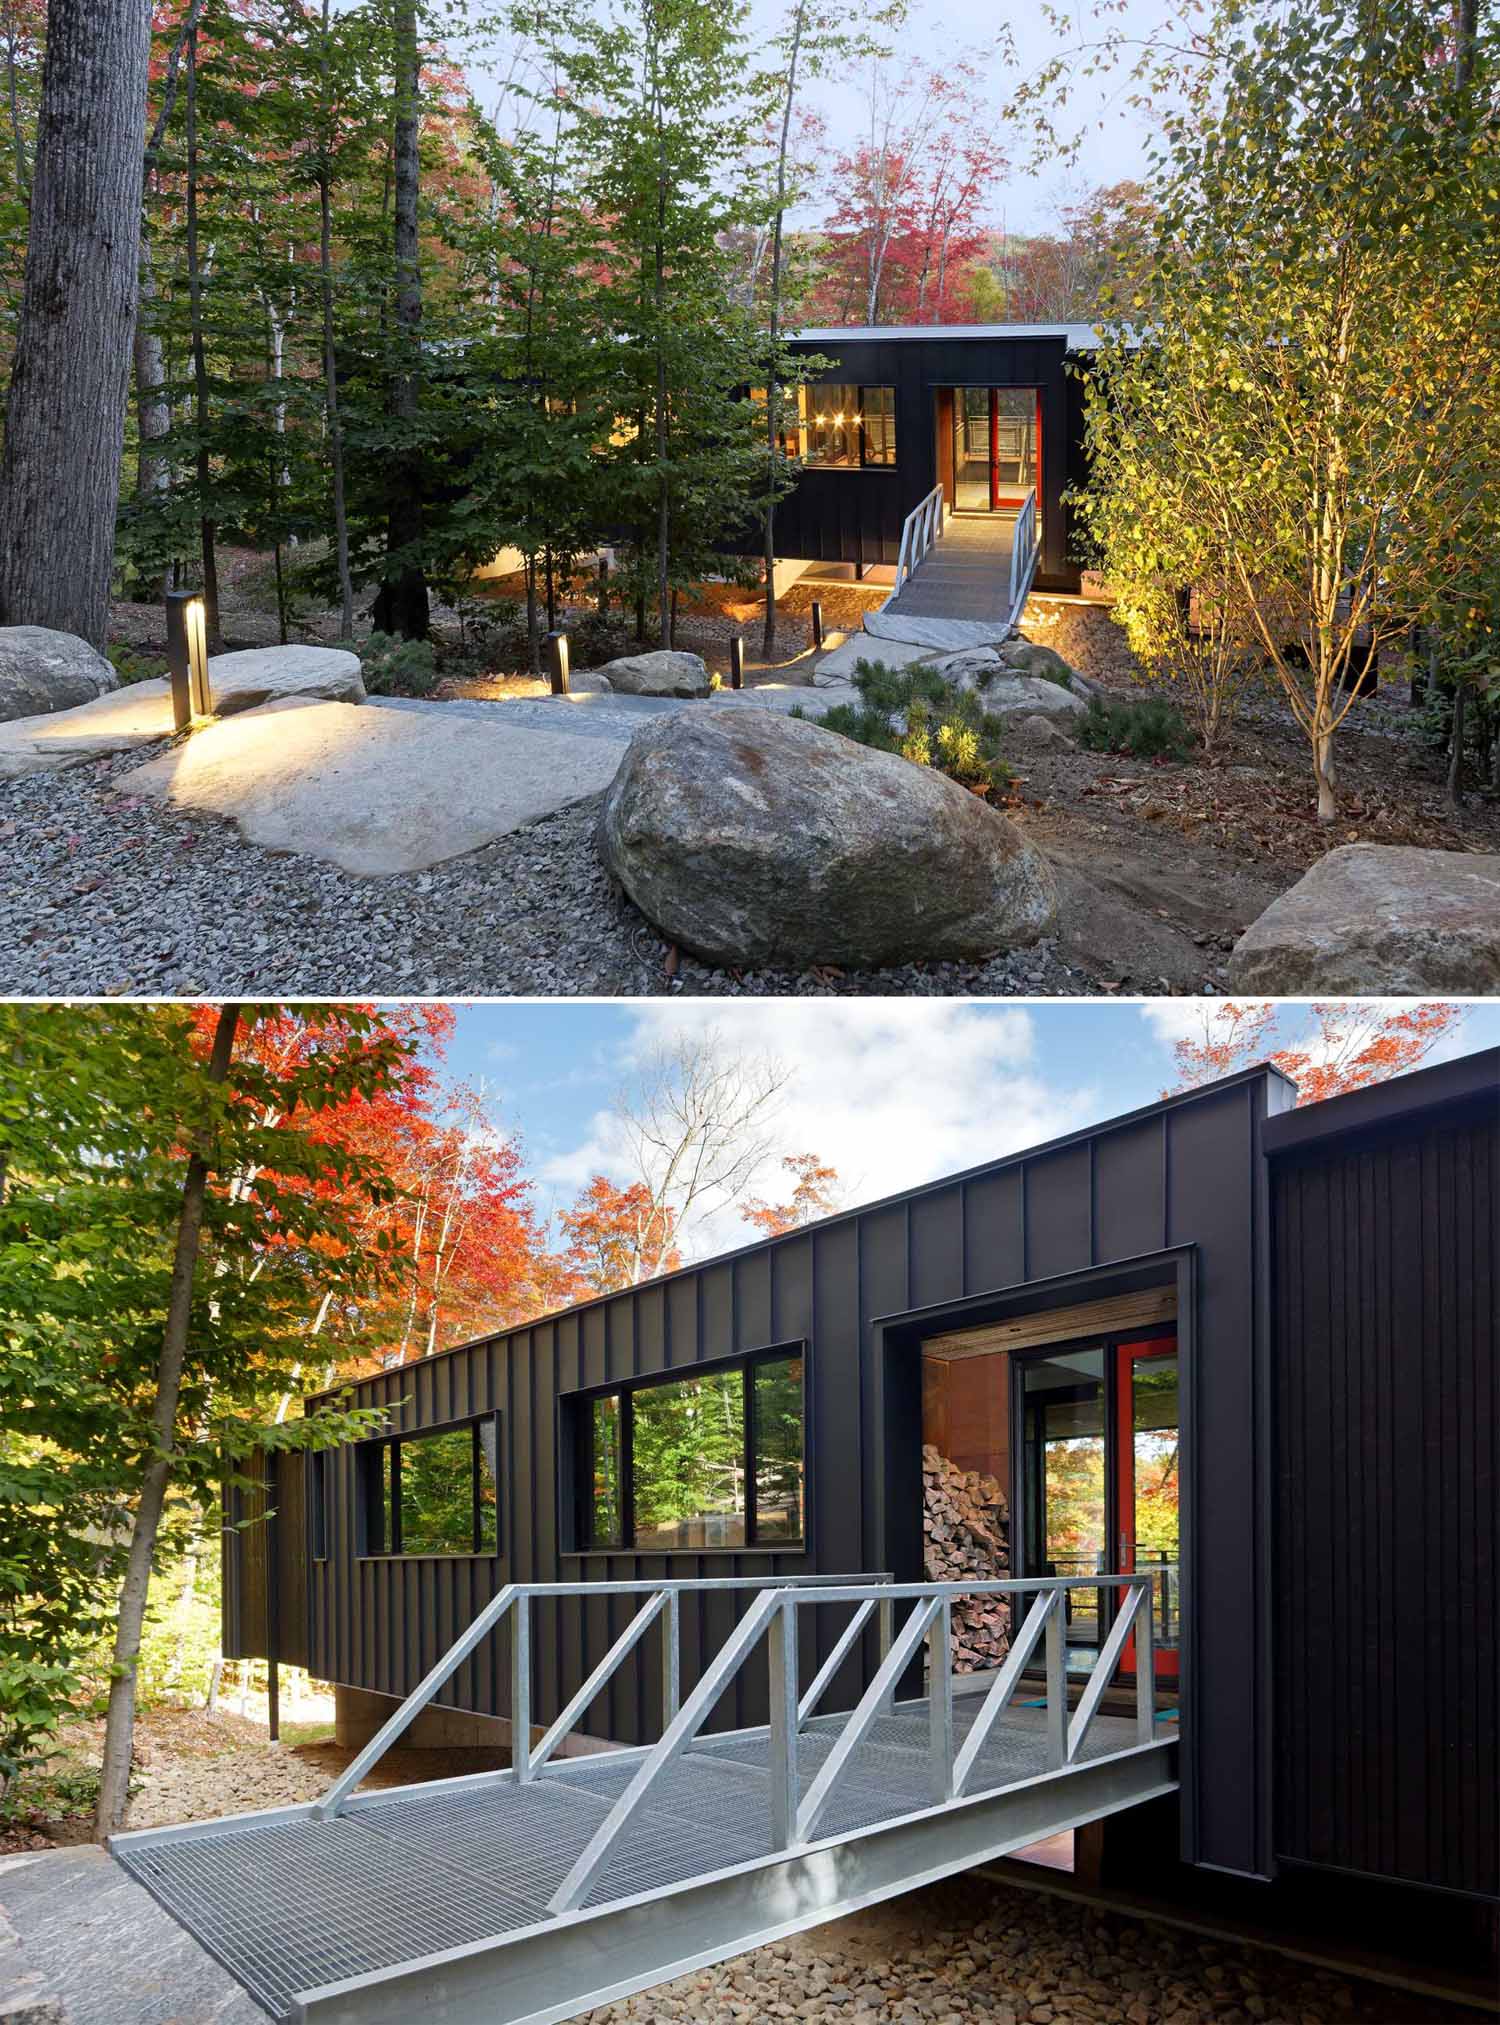 A galvanized steel bridge, which connects the granite slab steps of the hillside, brings you across to the generous glazed front doorway, while the dark exterior material palette allows the home to contrast the lively colors of the forest.